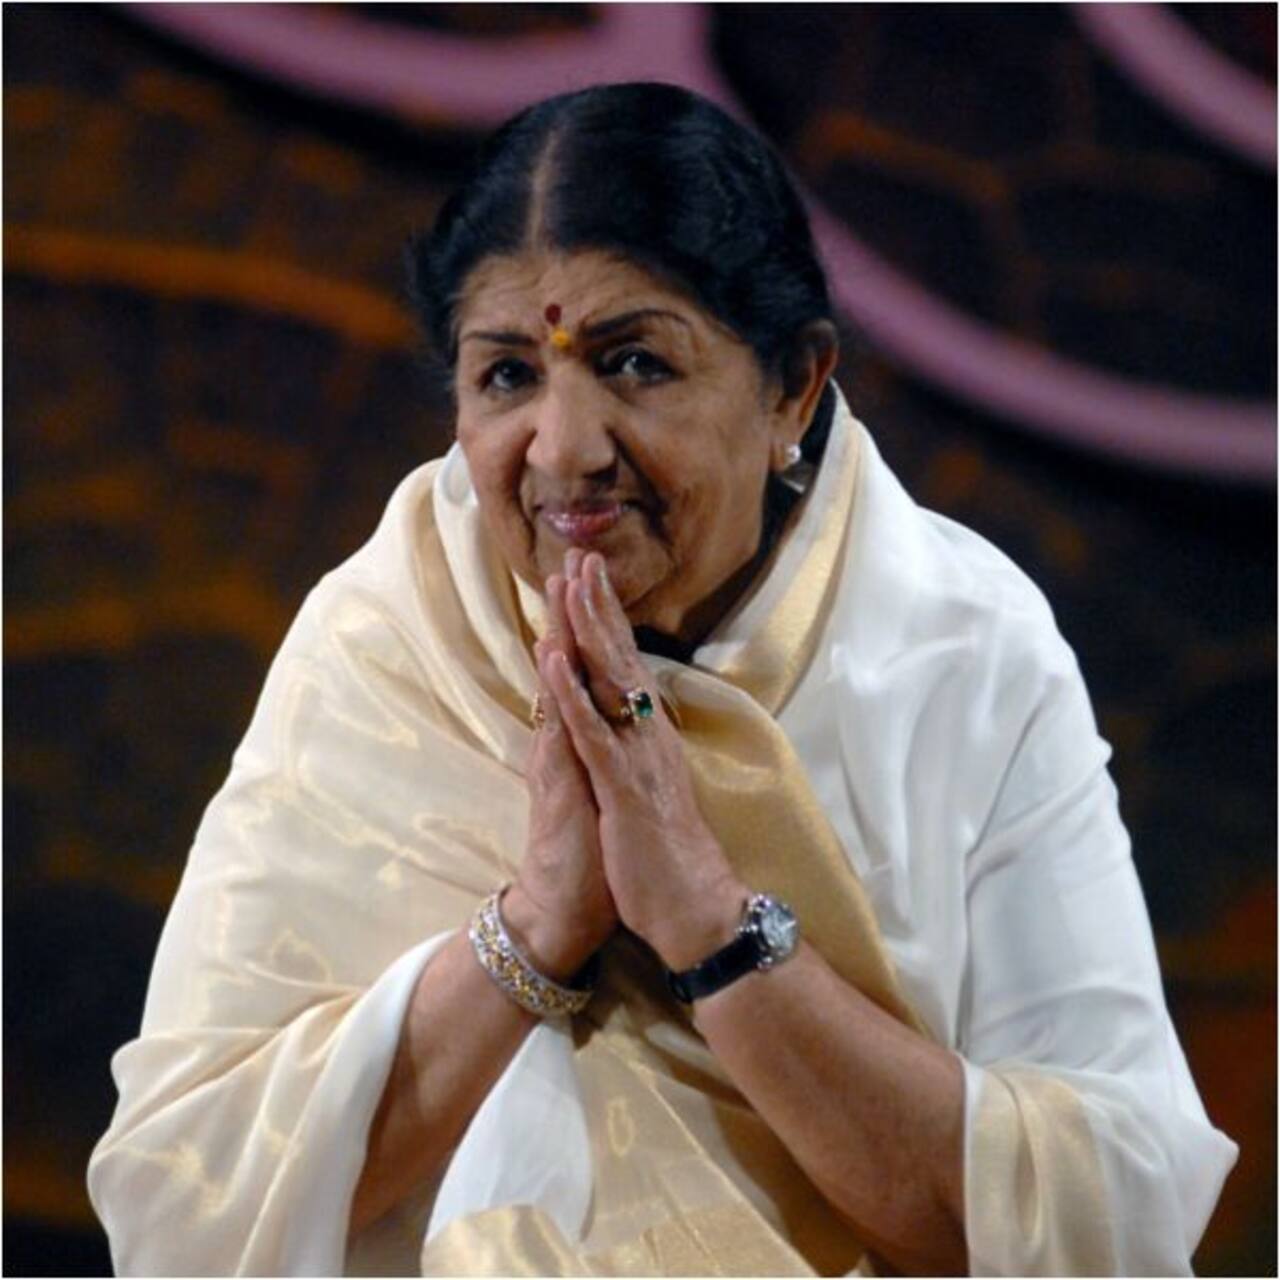 Grammy Awards 2022: No mention of Lata Mangeshkar in memoriam leaves fans disappointed – Read Tweets